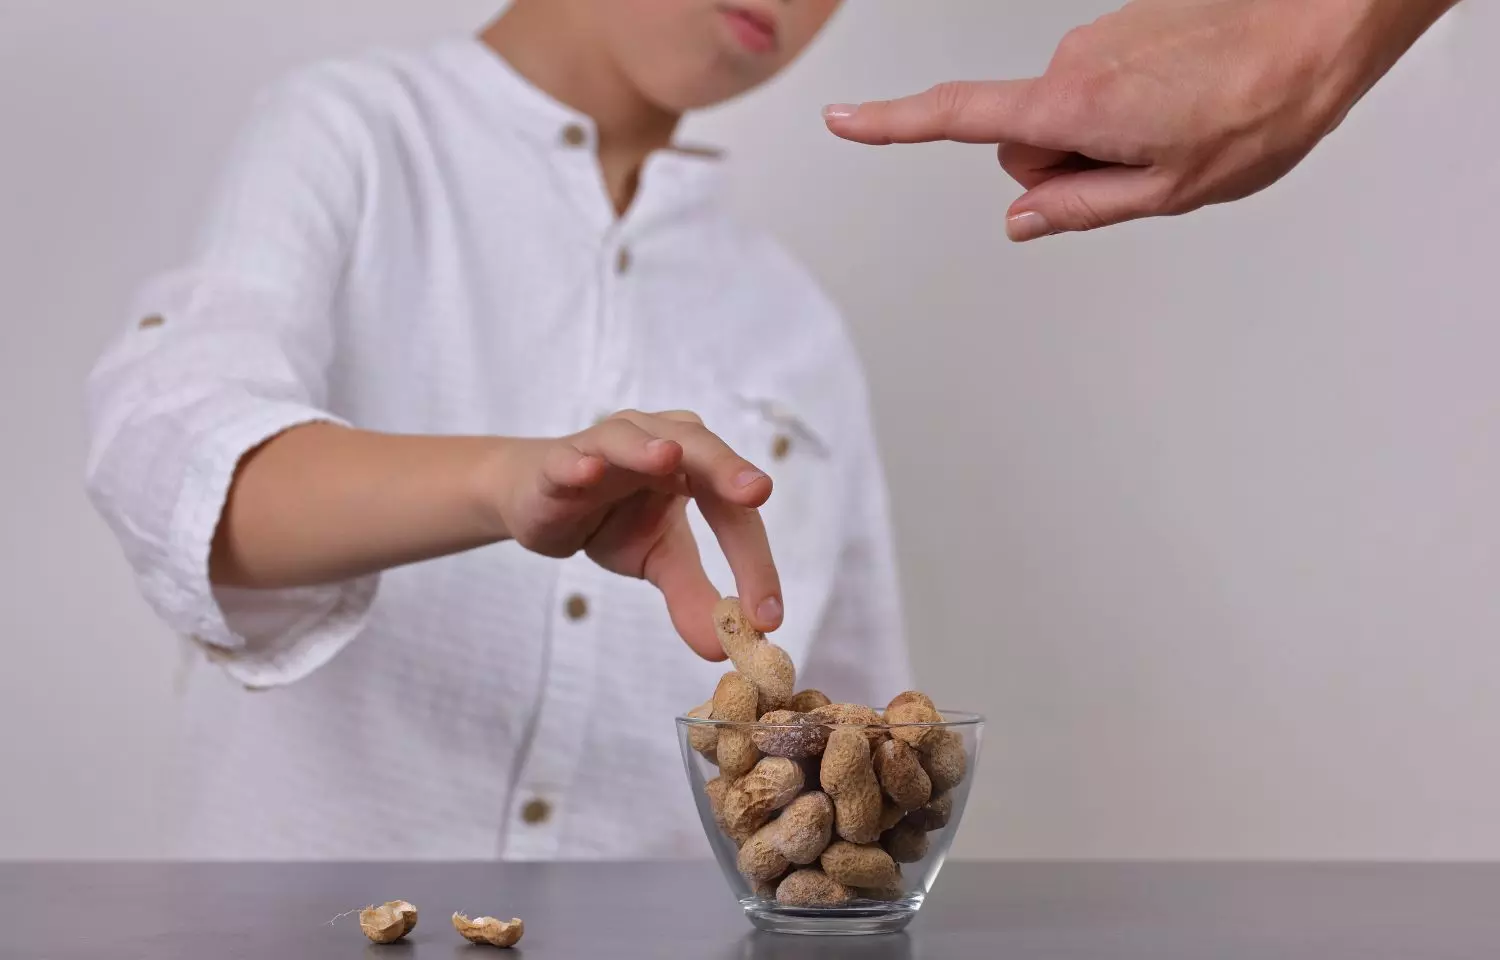 Cognitive behavioral therapy may benefit kids with food allergy-related anxiety